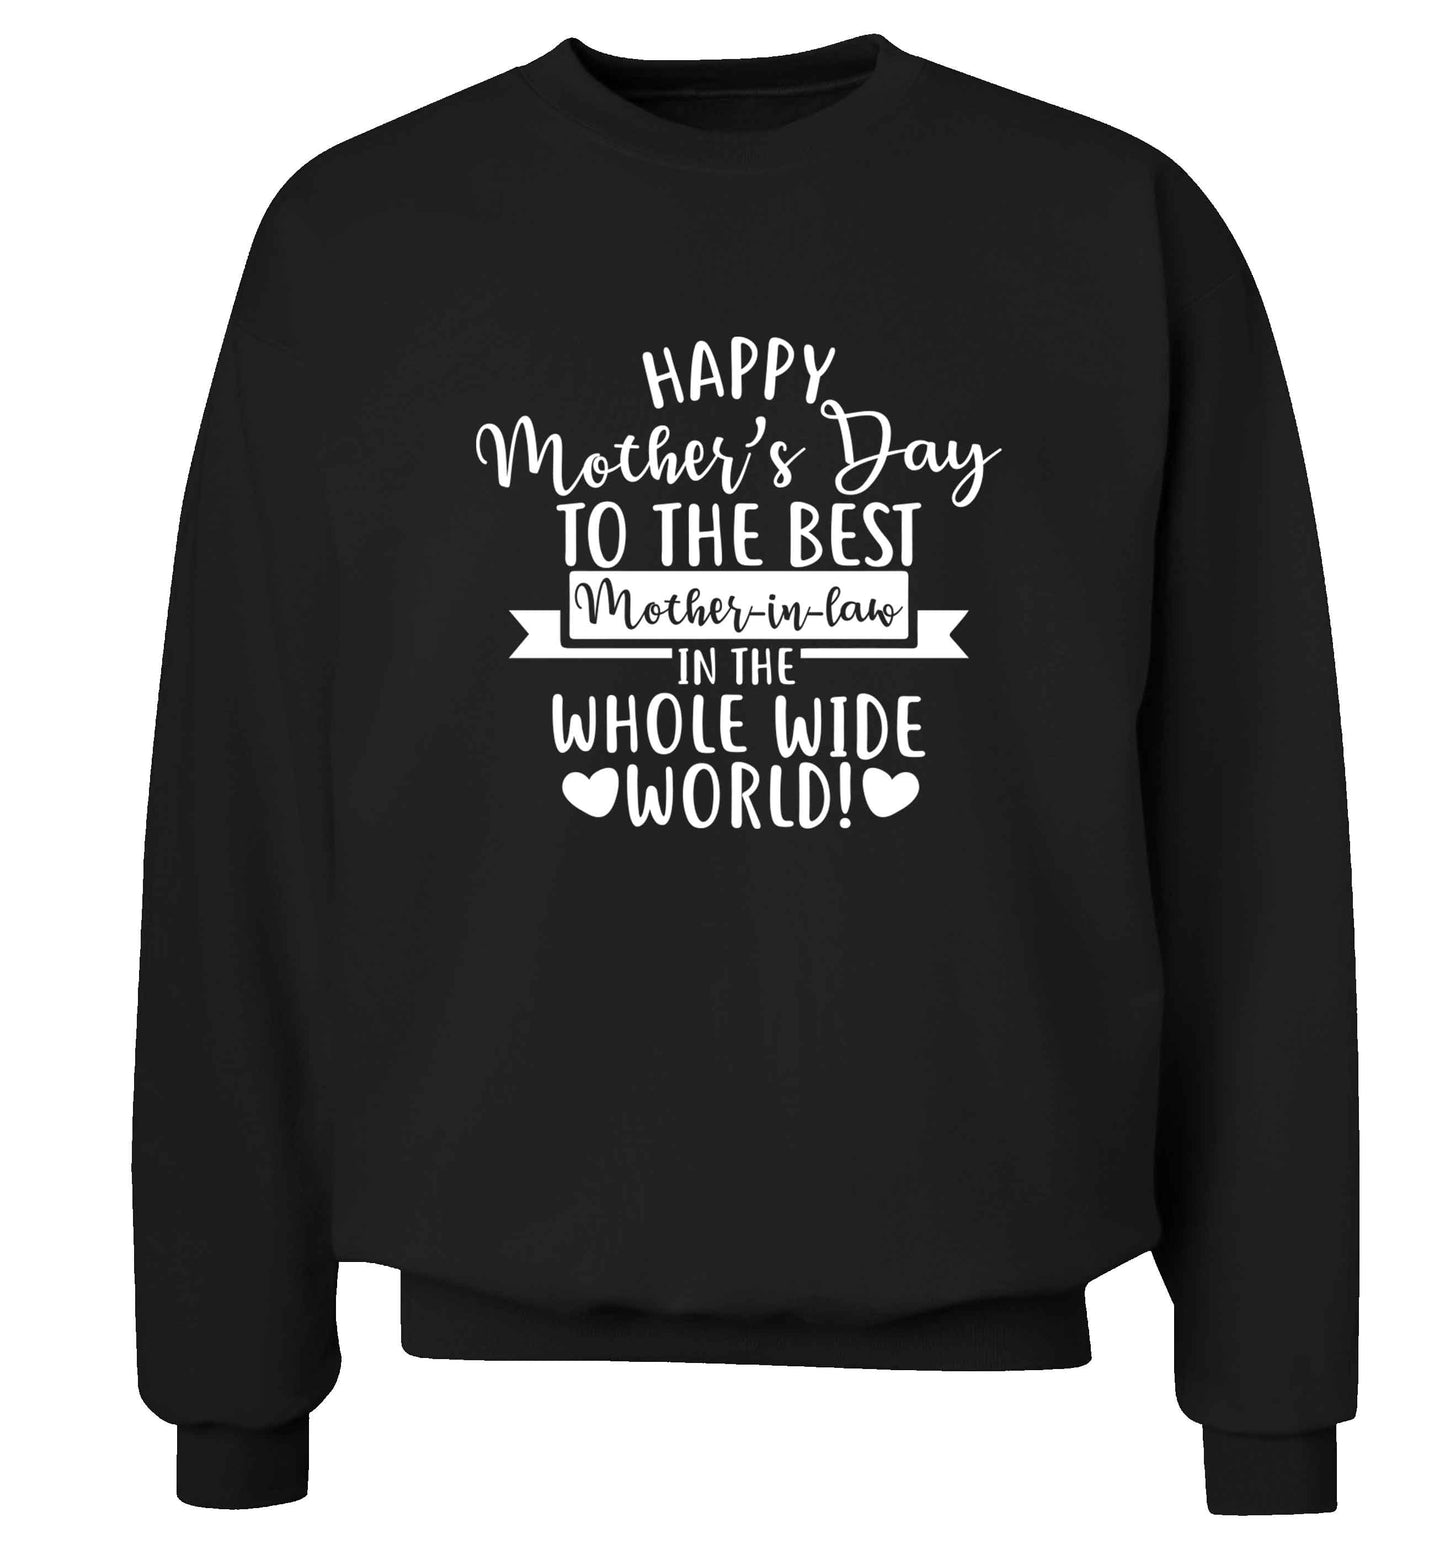 Happy mother's day to the best mother-in law in the world adult's unisex black sweater 2XL